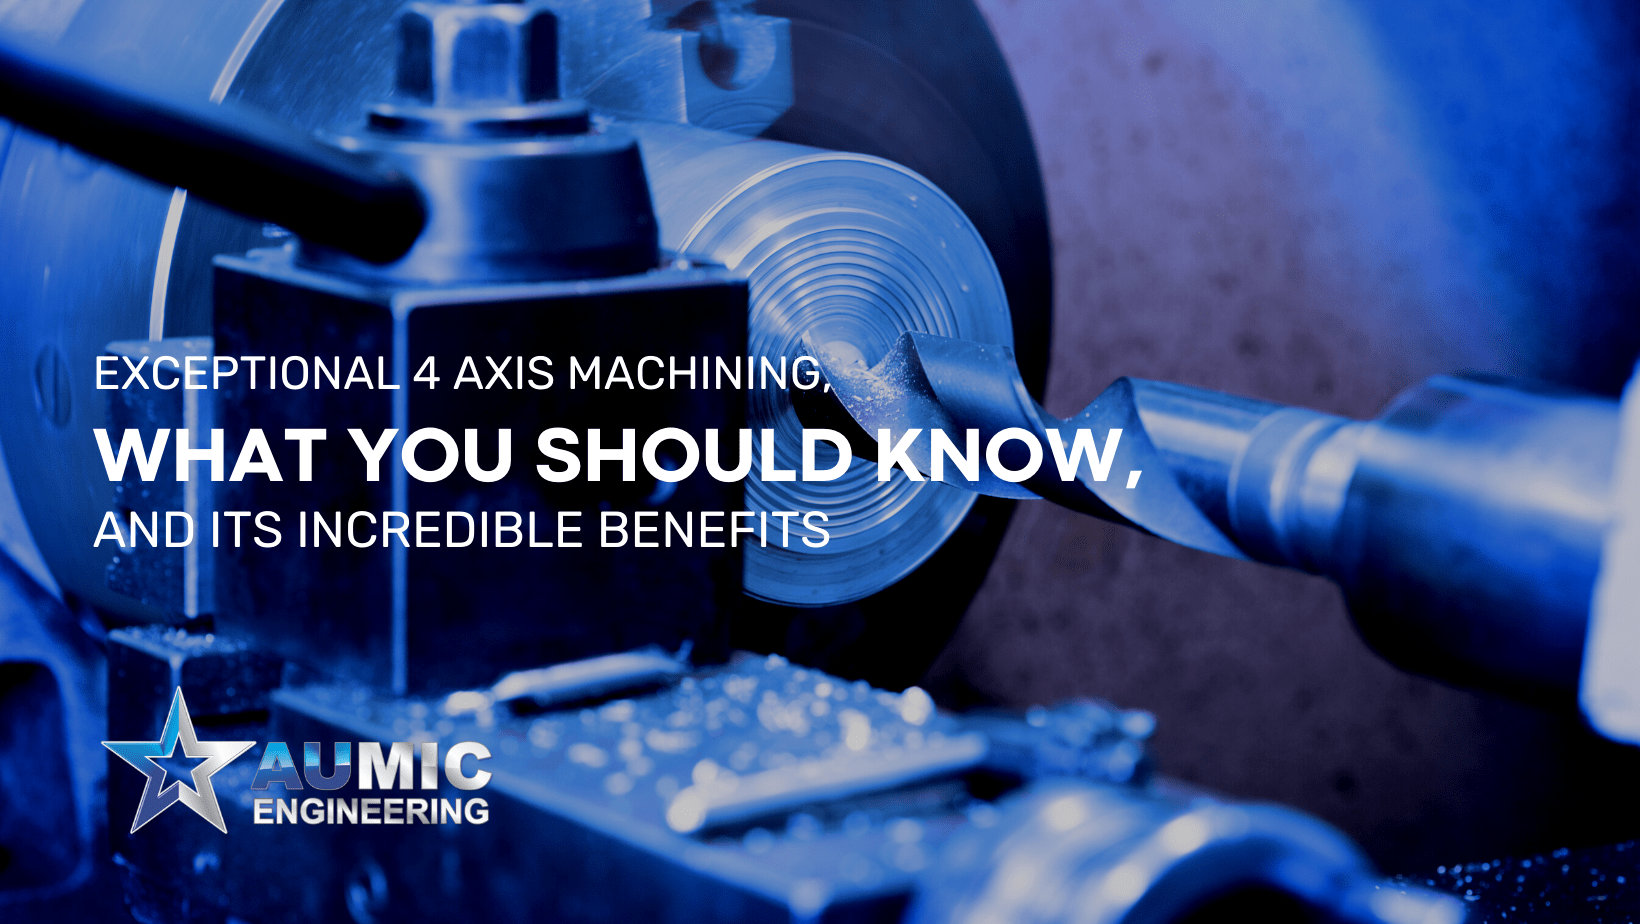 4 axis machining, milling, fabrication [Aumic Engineering]